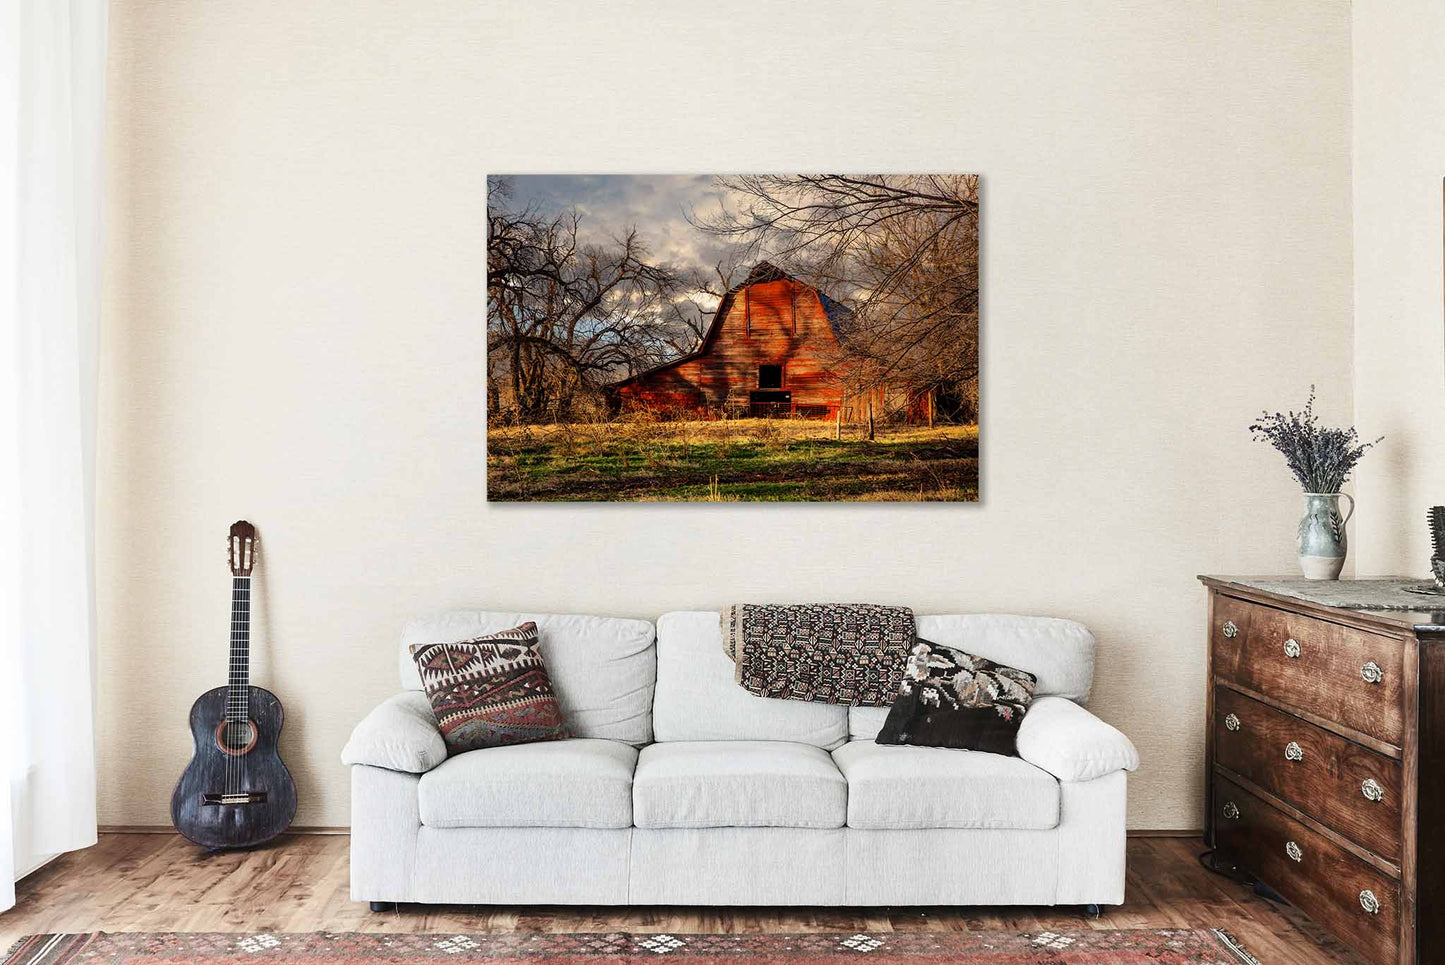 Country Canvas Wall Art (Ready to Hang) Gallery Wrap of Rustic Red Barn in Shadows of Leafless Trees in Oklahoma Farm Photography Farmhouse Decor